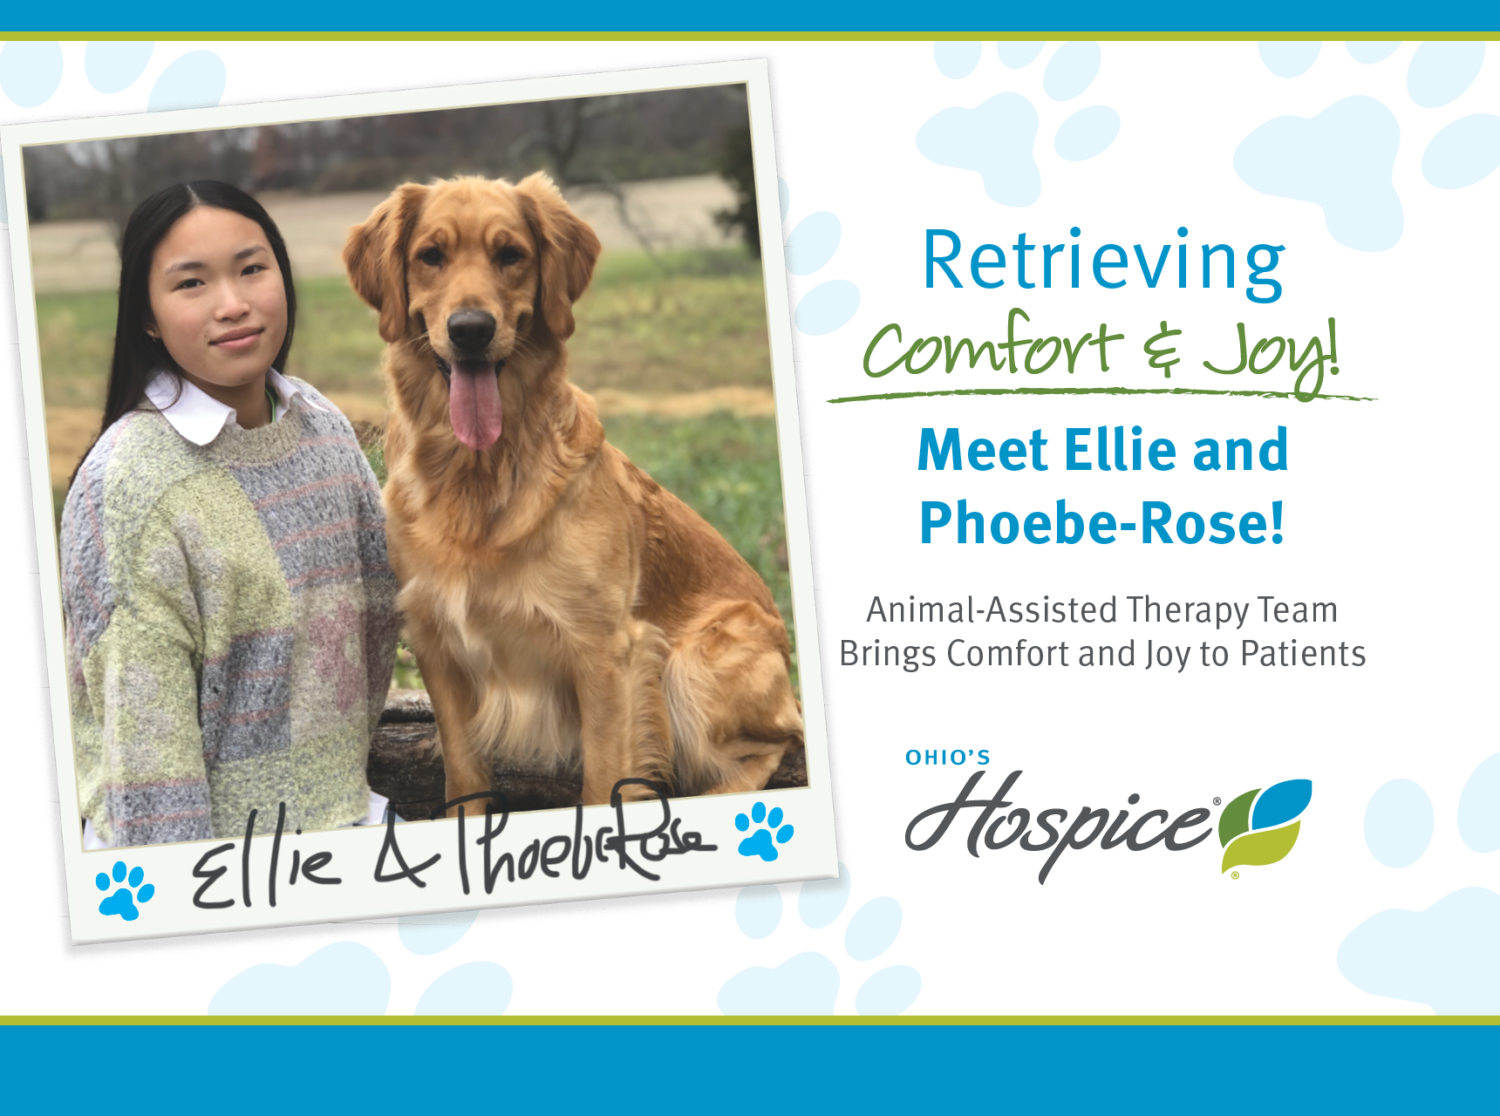 Retrieving Comfort & Joy: Meet Ellie and Phoebe-Rose - Animal-Assisted Therapy Team Brings Comfort and Joy to Patients